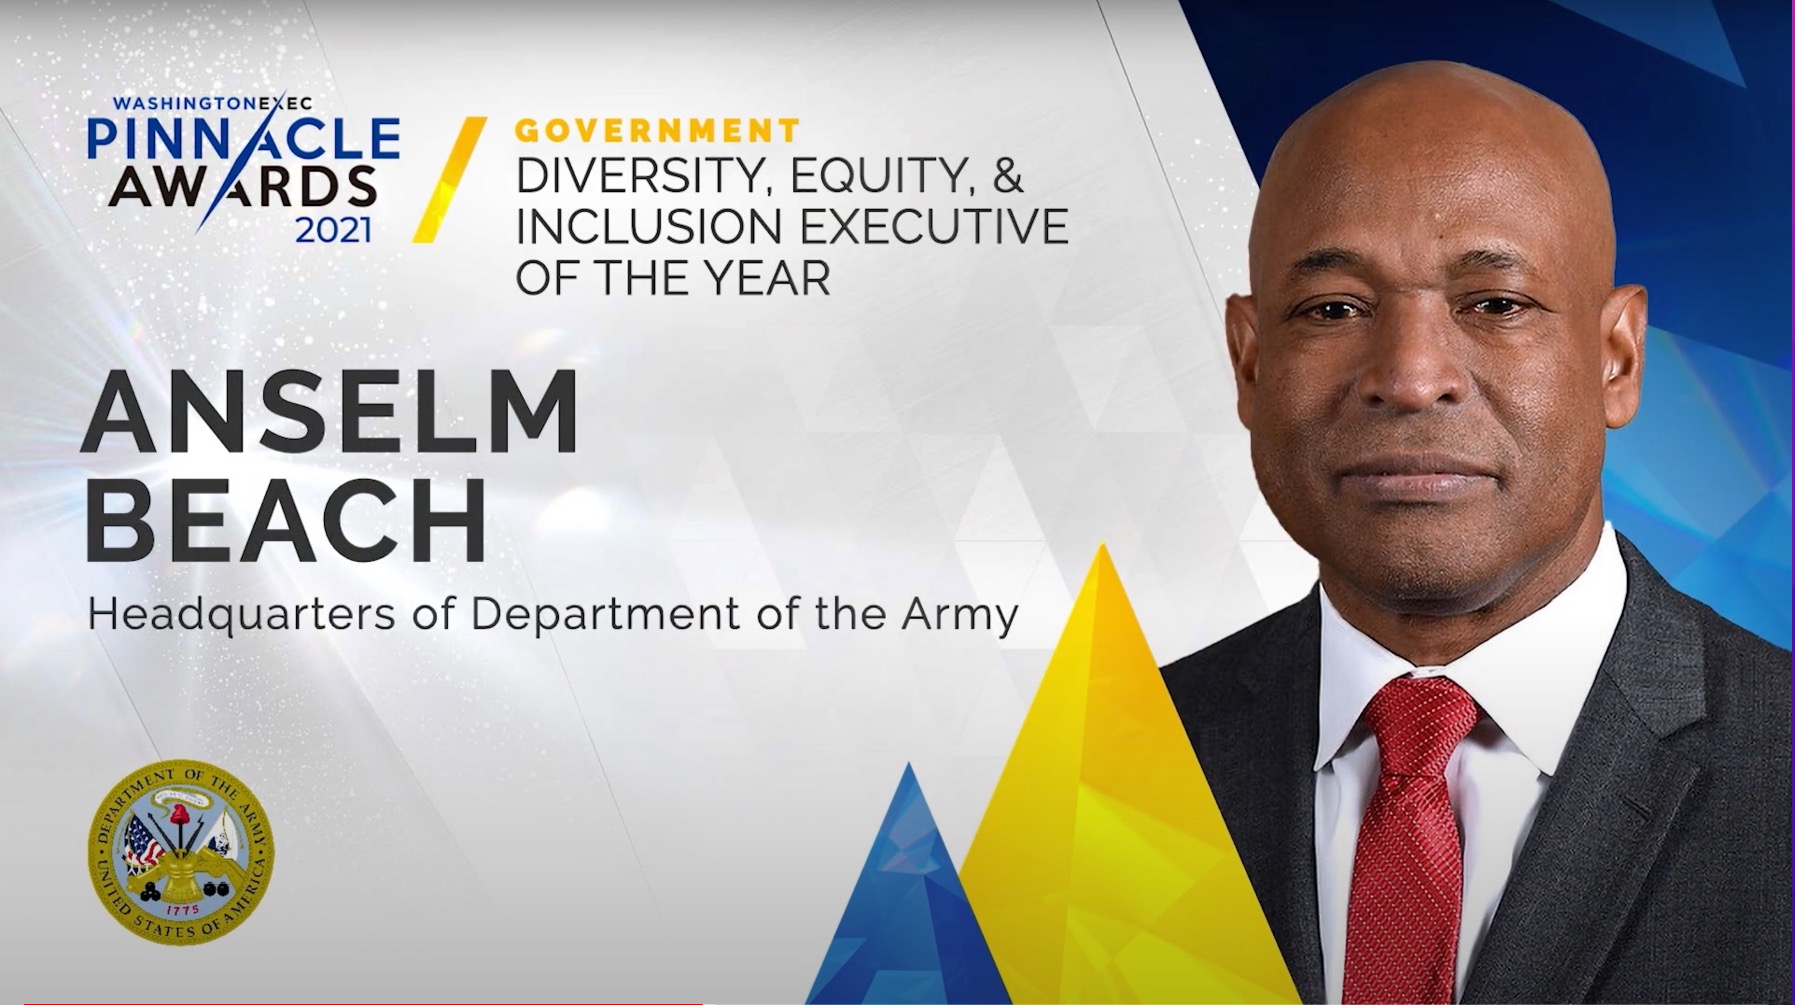 DEI - Congratulations to Anselm Beach from the U.S. Department of the Army (Headquarters) on winning the award for Diversity, Equity, & Inclusion Executive of the Year in the Government Sector